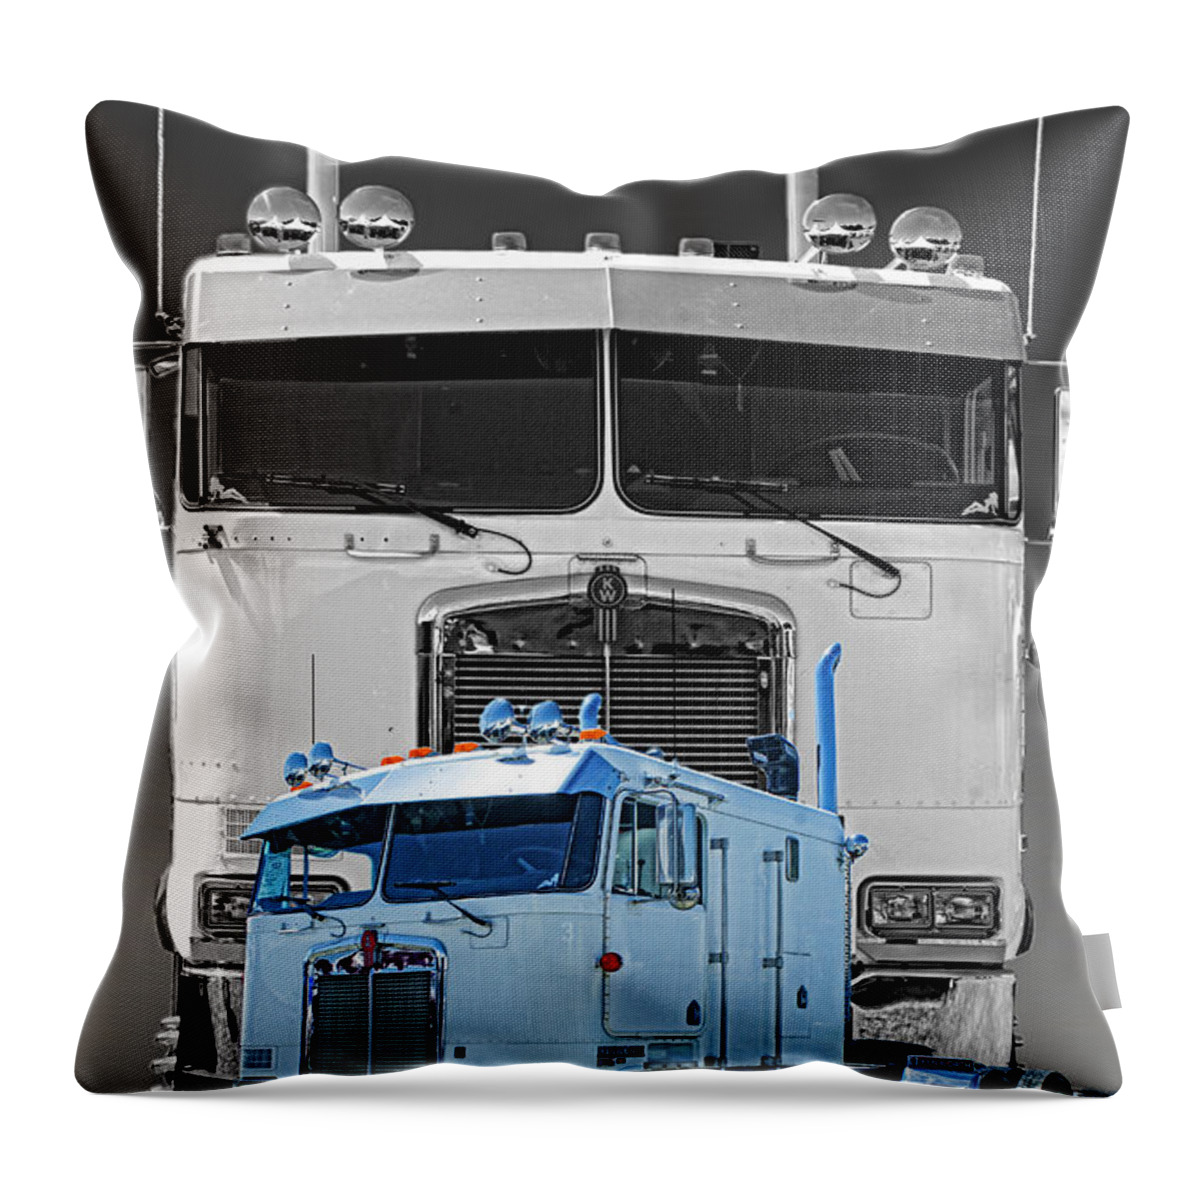 Trucks Throw Pillow featuring the photograph Hdrcatr3137-13 by Randy Harris